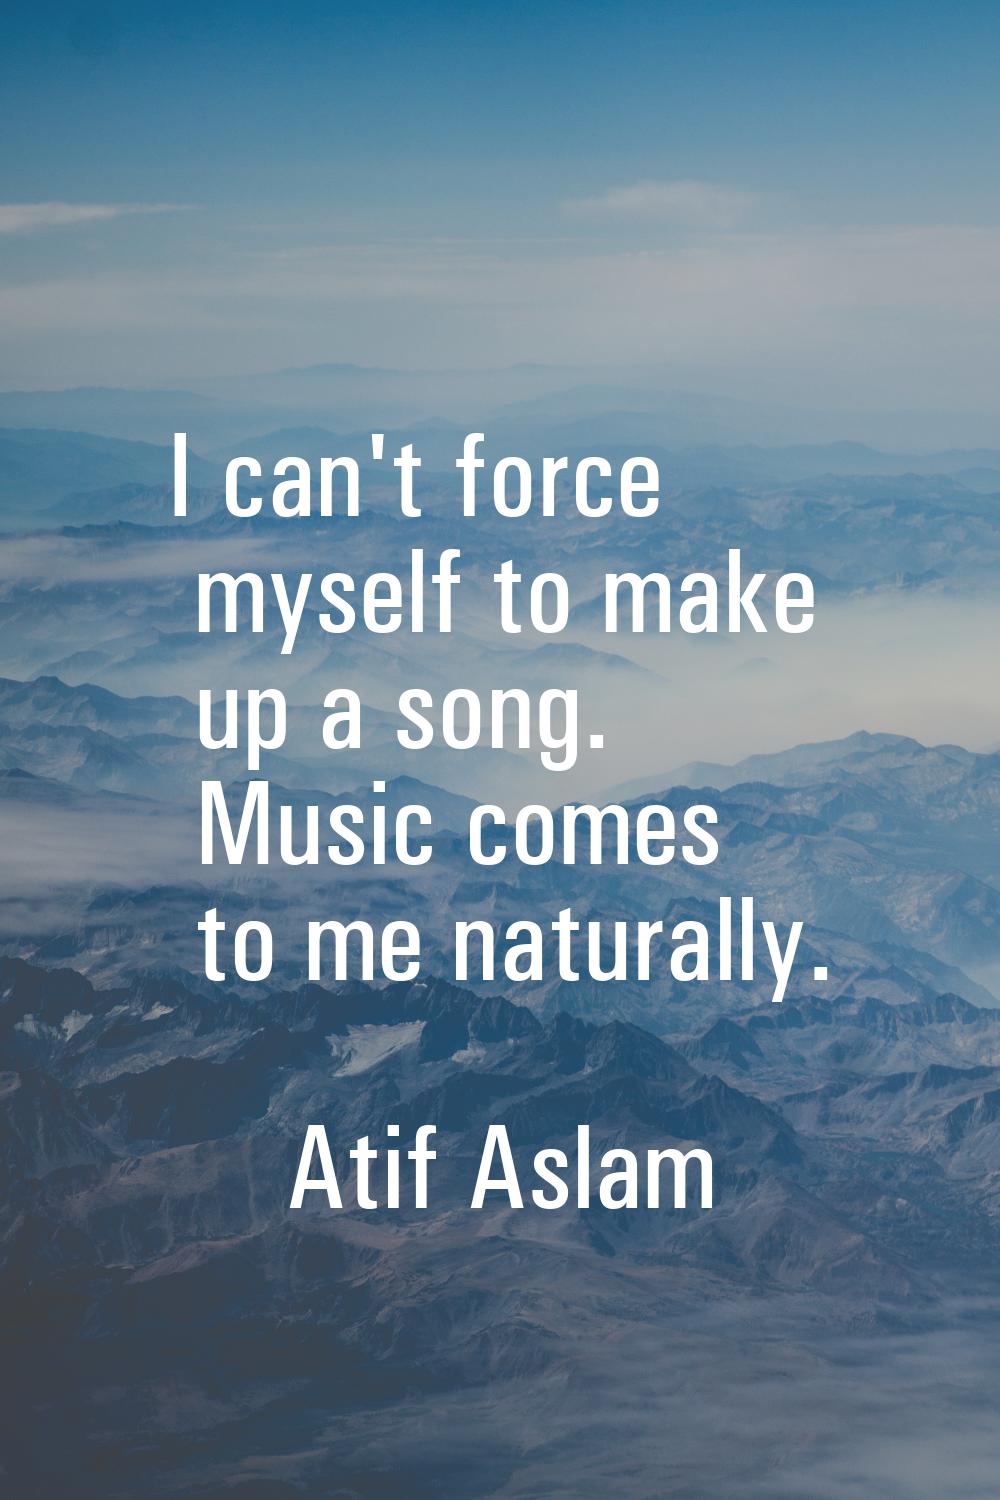 I can't force myself to make up a song. Music comes to me naturally.